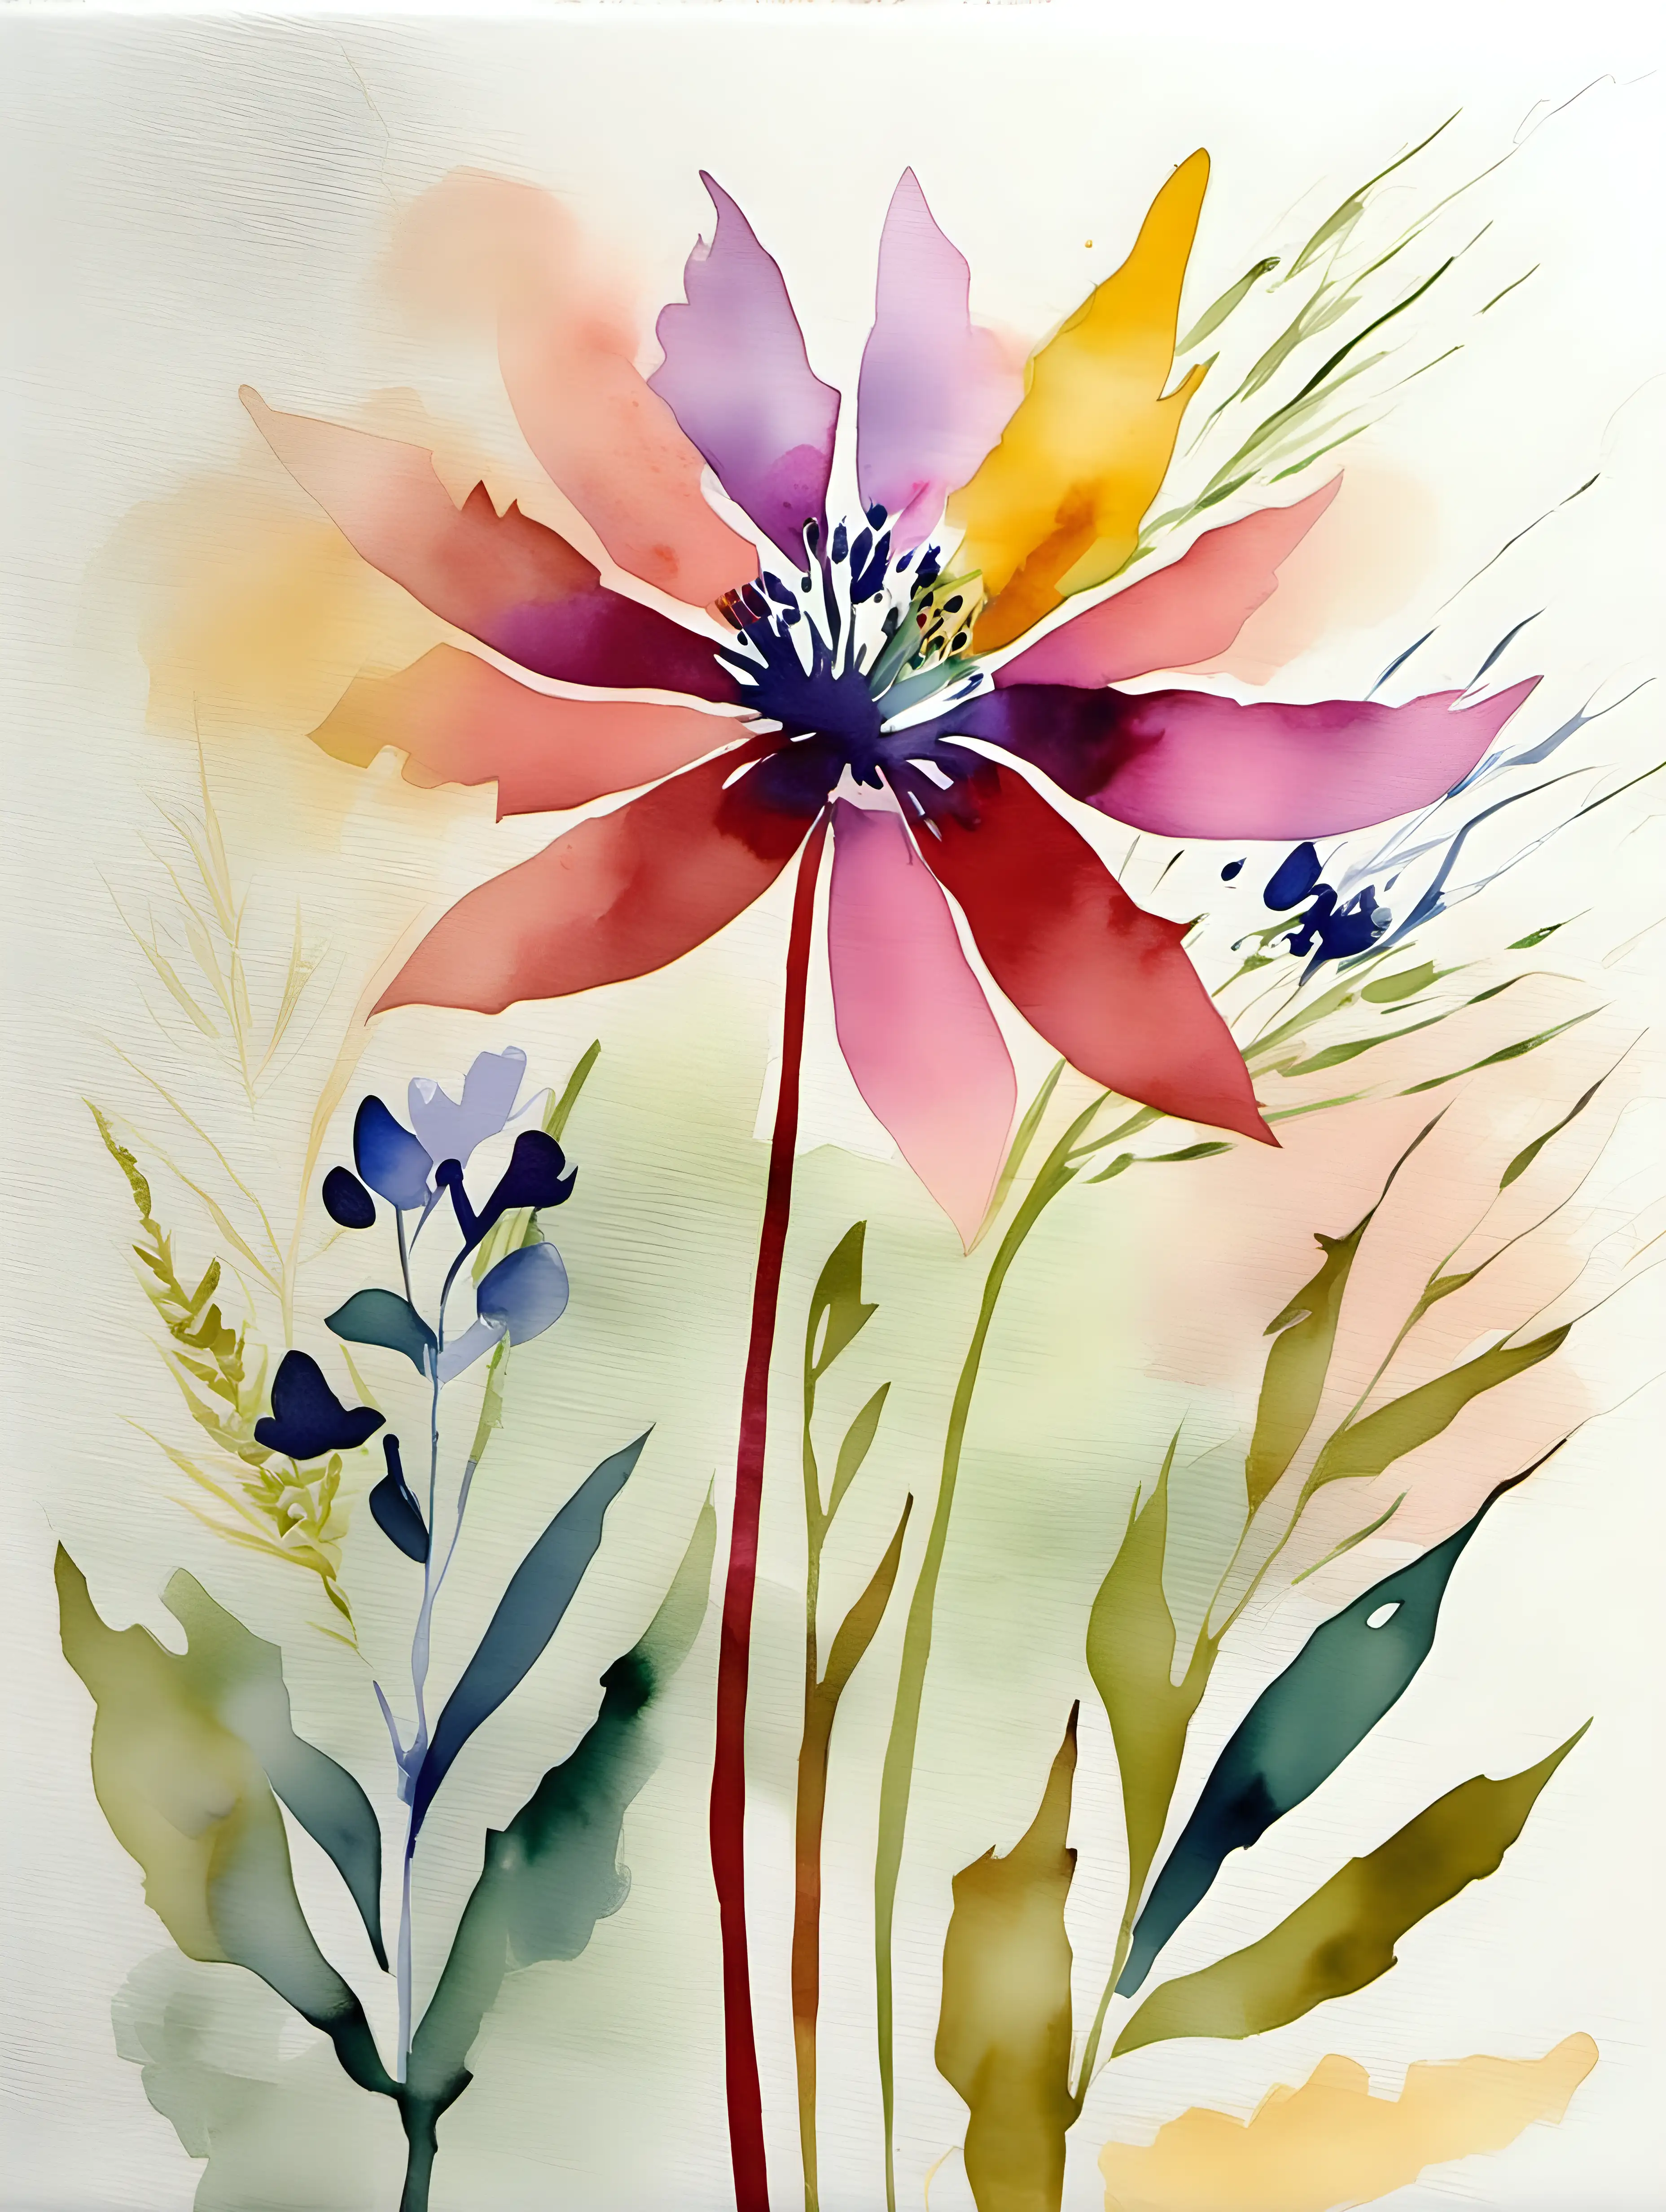 Abstract Floral Watercolor Print Vibrant Wildflower Artwork for Walls